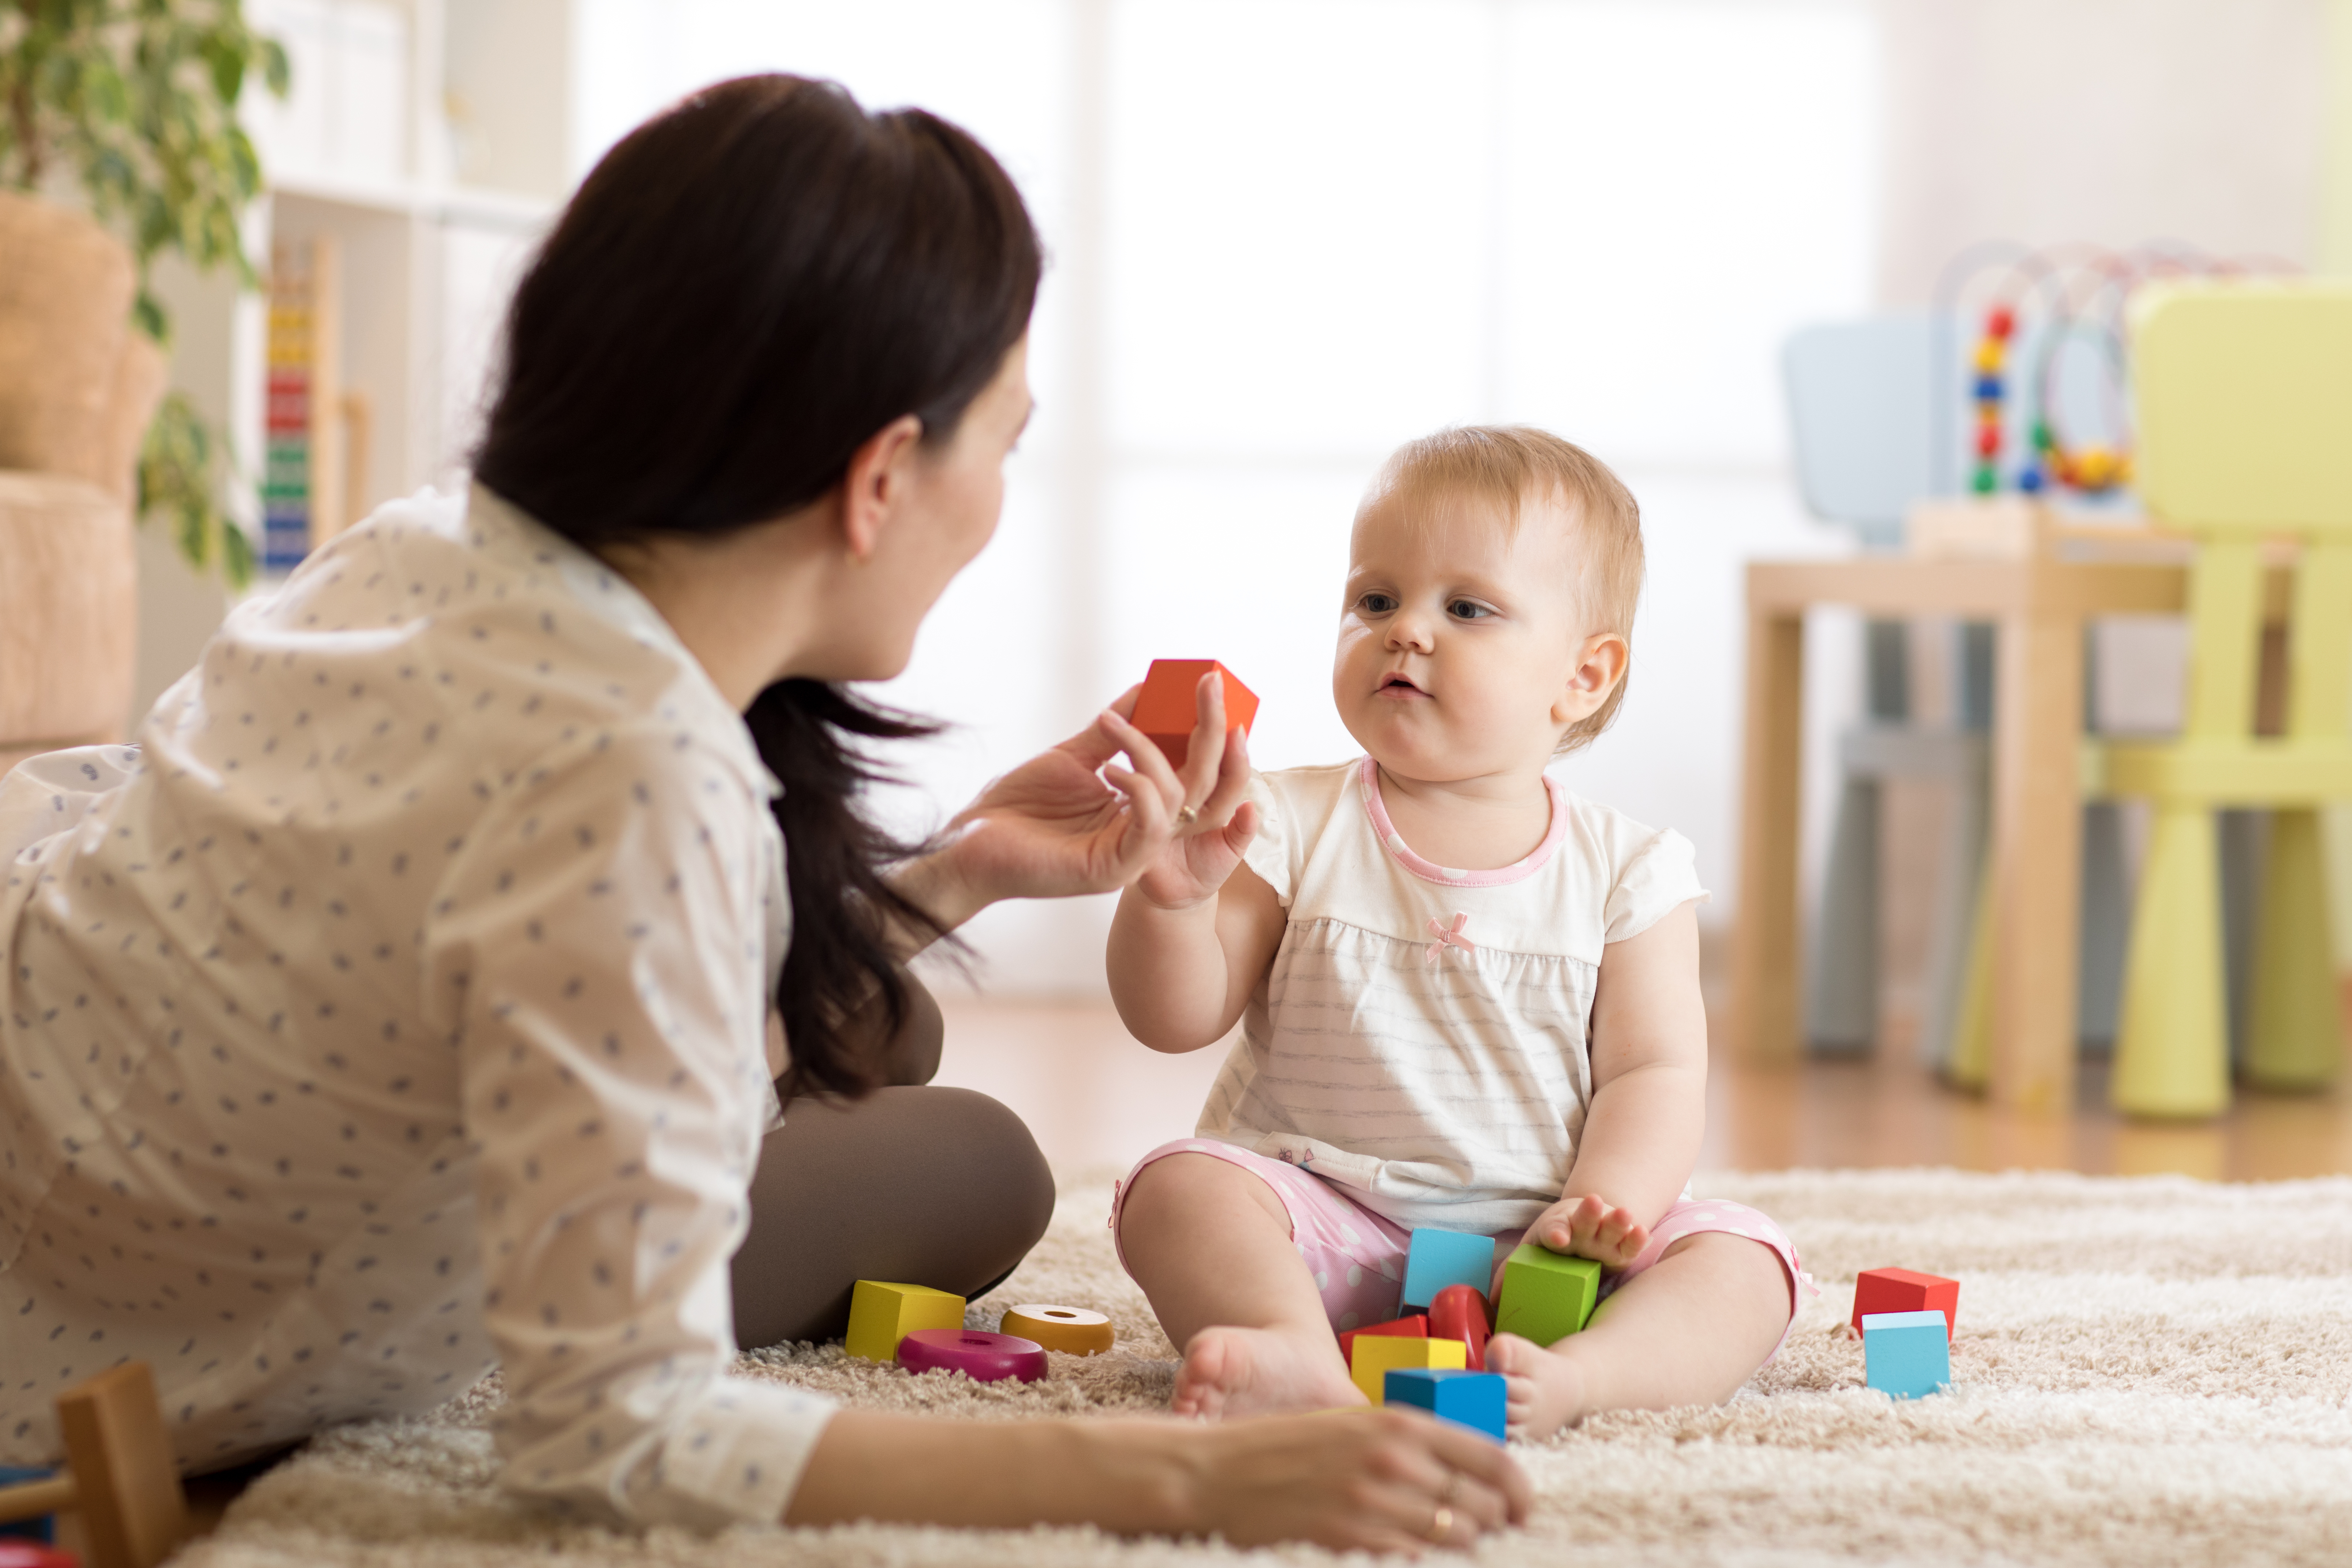 A babysitter is pictured taking care of a baby | Source: Shutterstock